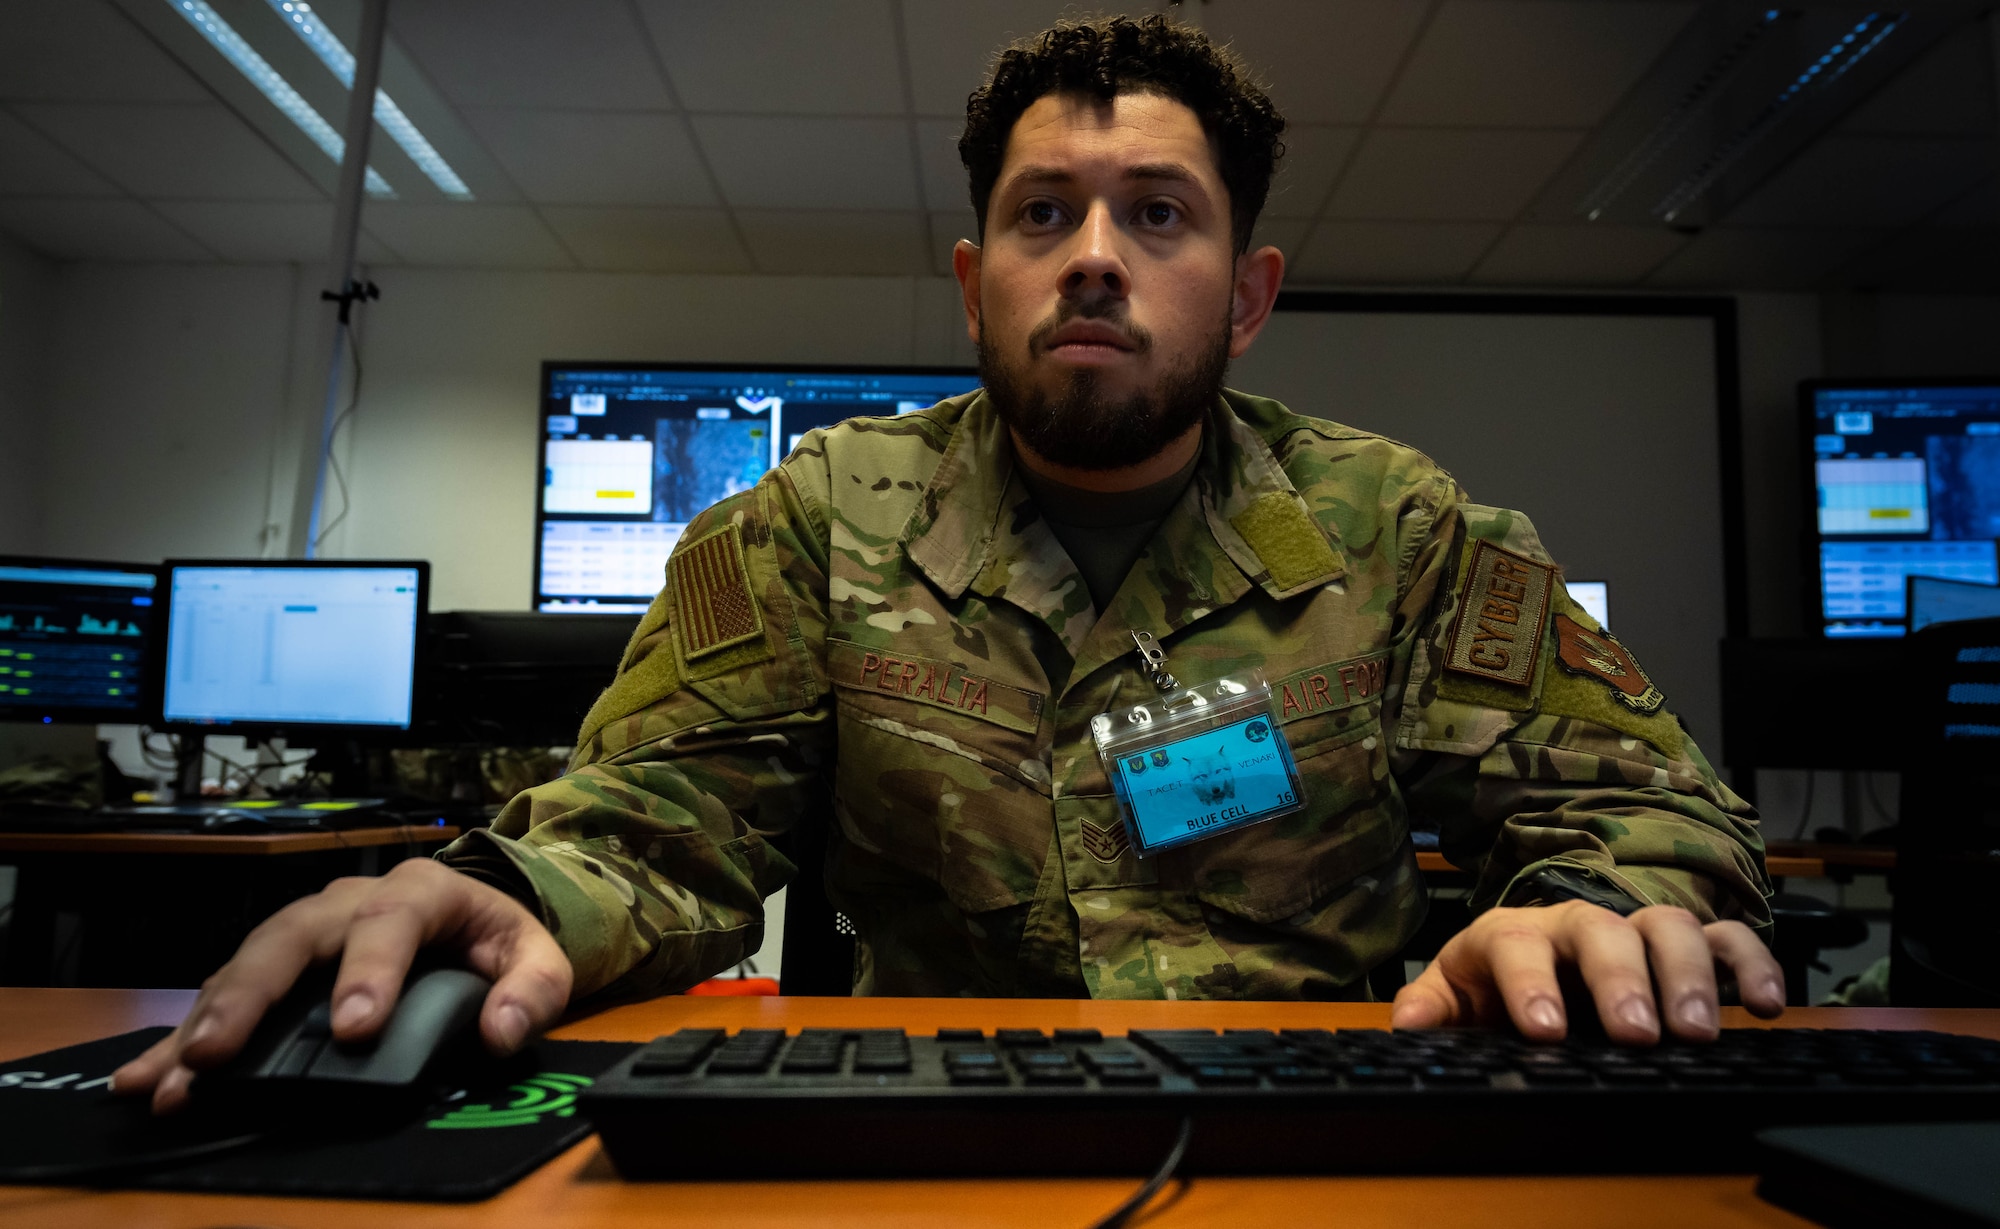 U.S. Air Force Staff Sgt. Joseph Peralta, 52nd Communications Squadron mission defense team supervisor  assigned to Spangdahlem Air Base, Germany, identifies an indicator of network compromise during exercise Tacet Venari at Ramstein Air Base, Germany, May 19, 2022. Tacet Venari is a two-week cyber exercise giving participants a chance to implement the skills they've obtained in a controlled environment. (U.S. Air Force photo by Airman 1st Class Jared Lovett)